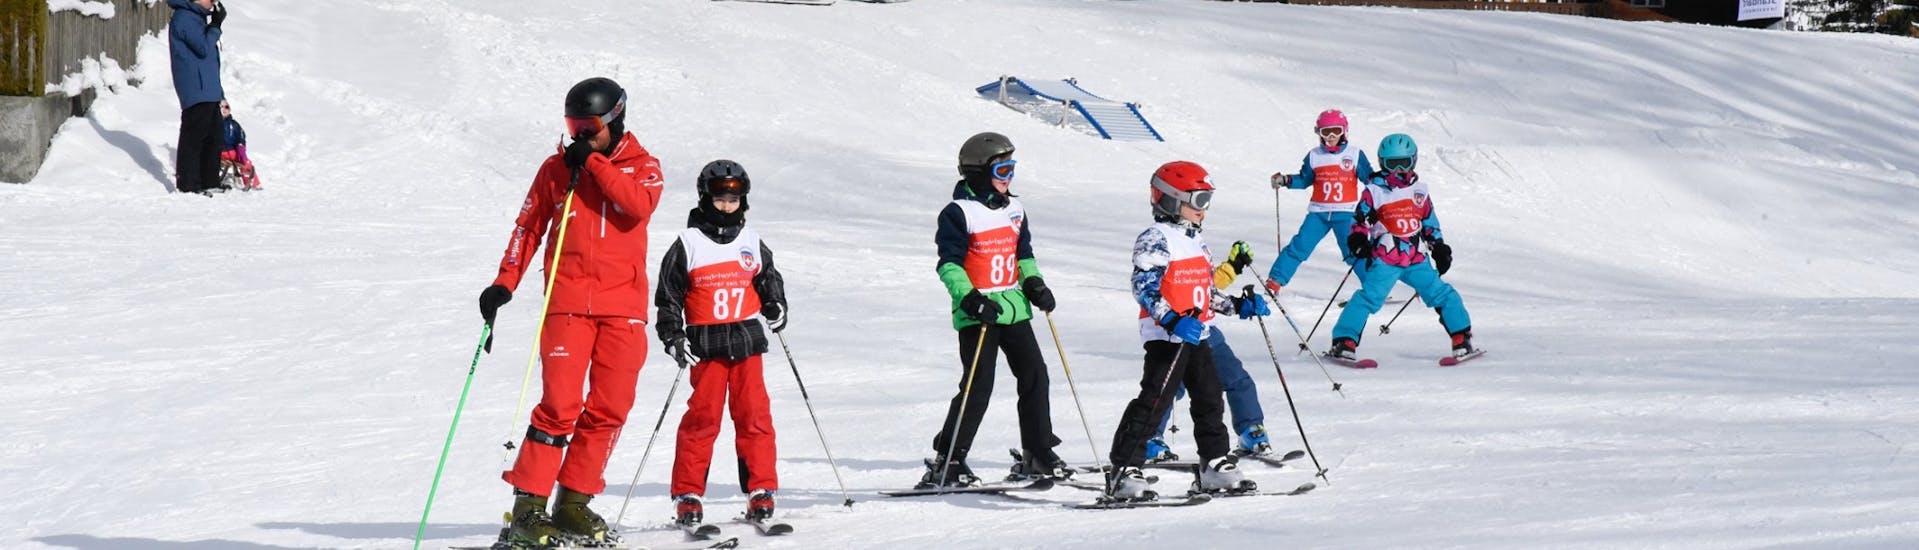 During the Kids Ski Lessons (3-15 y.) for All Levels - Männlichen with Swiss Ski School Grindelwald, a group of advanced skiers explore the slopes together with the ski instructor.